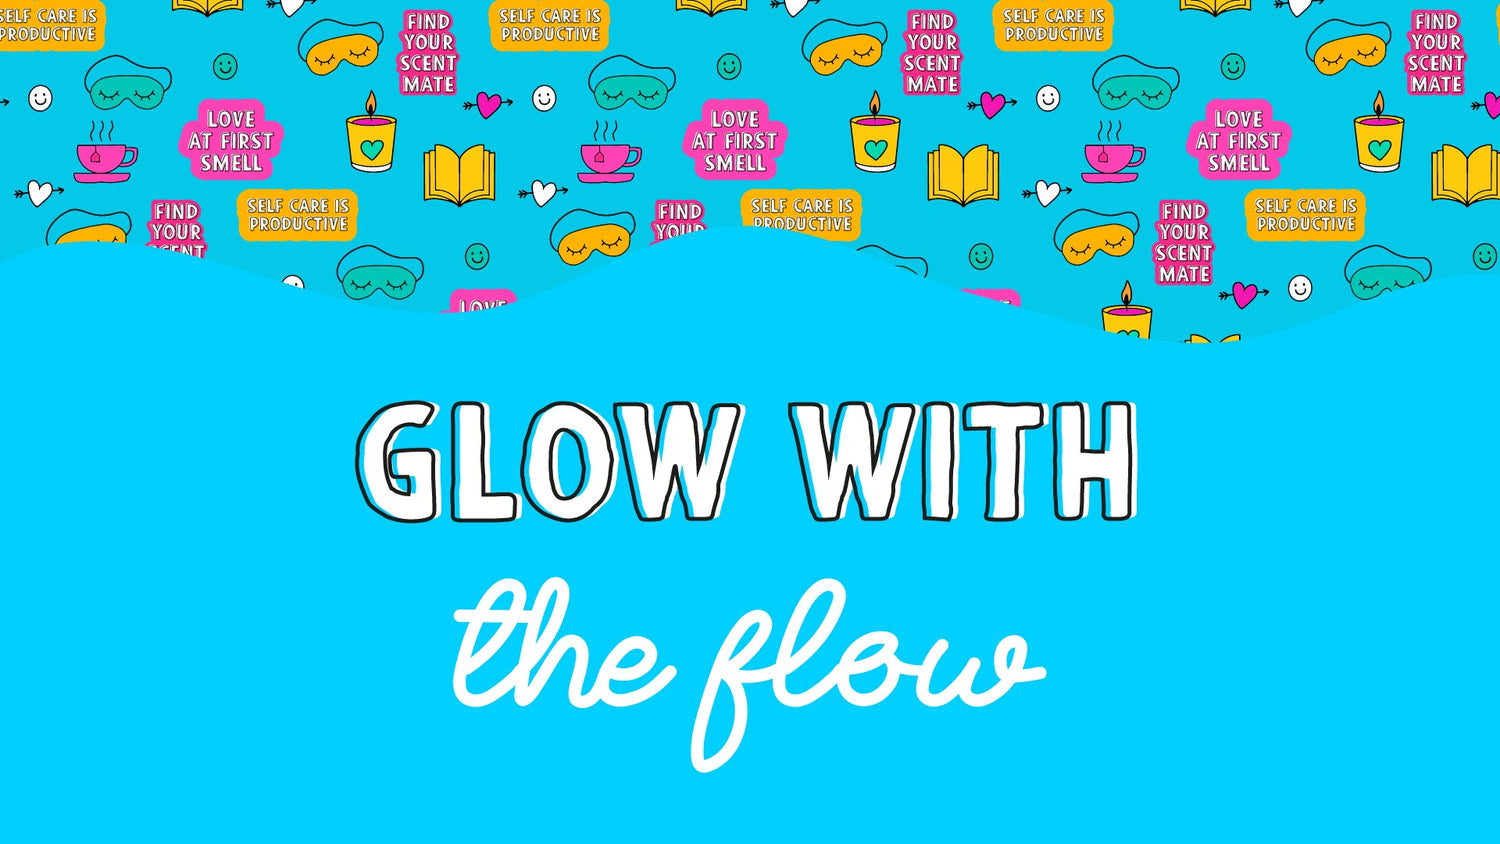 ay goodbye to stress and hello to serenity with our Glow with the Flow collection.